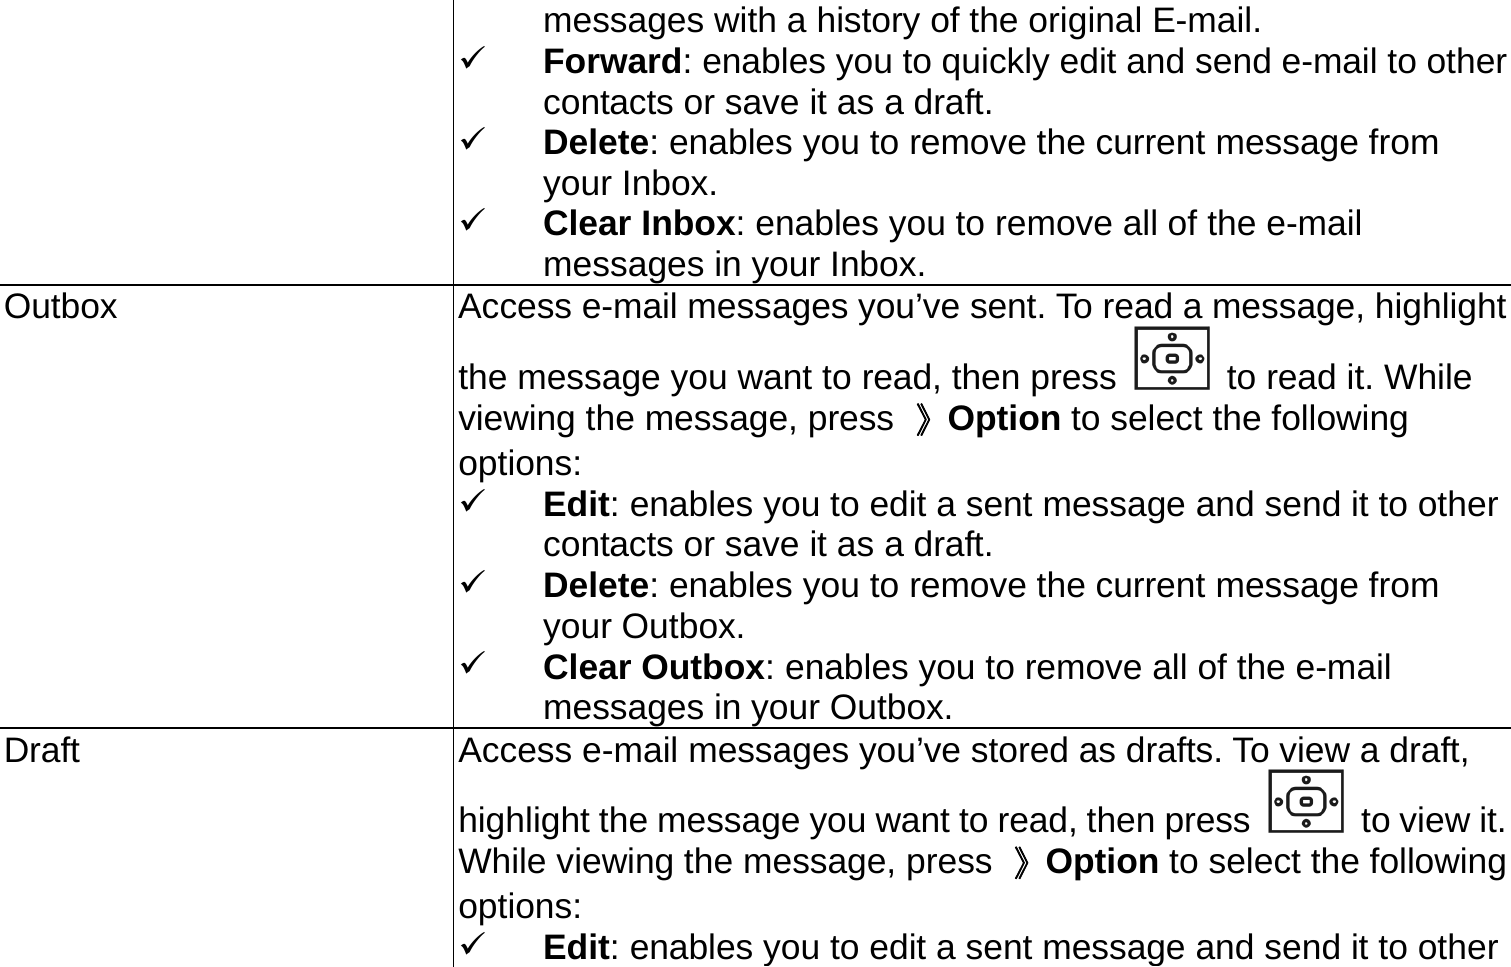 messages with a history of the original E-mail.   Forward: enables you to quickly edit and send e-mail to other contacts or save it as a draft.   Delete: enables you to remove the current message from your Inbox.   Clear Inbox: enables you to remove all of the e-mail messages in your Inbox. Outbox  Access e-mail messages you’ve sent. To read a message, highlight the message you want to read, then press    to read it. While viewing the message, press  》Option to select the following options:   Edit: enables you to edit a sent message and send it to other contacts or save it as a draft.   Delete: enables you to remove the current message from your Outbox.   Clear Outbox: enables you to remove all of the e-mail messages in your Outbox. Draft  Access e-mail messages you’ve stored as drafts. To view a draft, highlight the message you want to read, then press  to view it. While viewing the message, press  》Option to select the following options:   Edit: enables you to edit a sent message and send it to other 